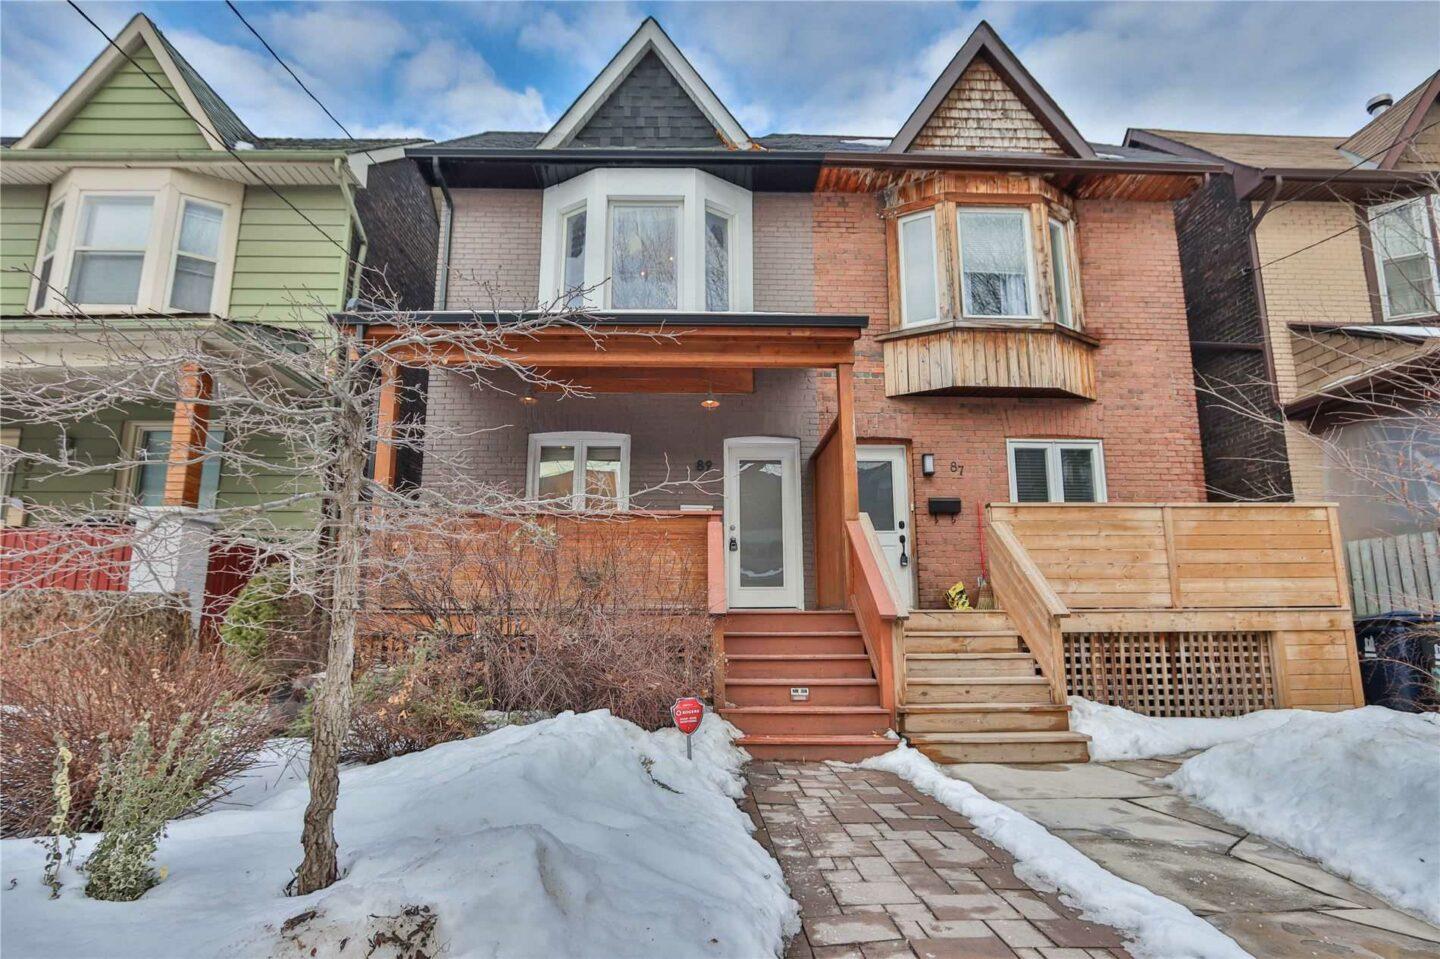 89 Empire Ave - Leslieville house for sale toronto